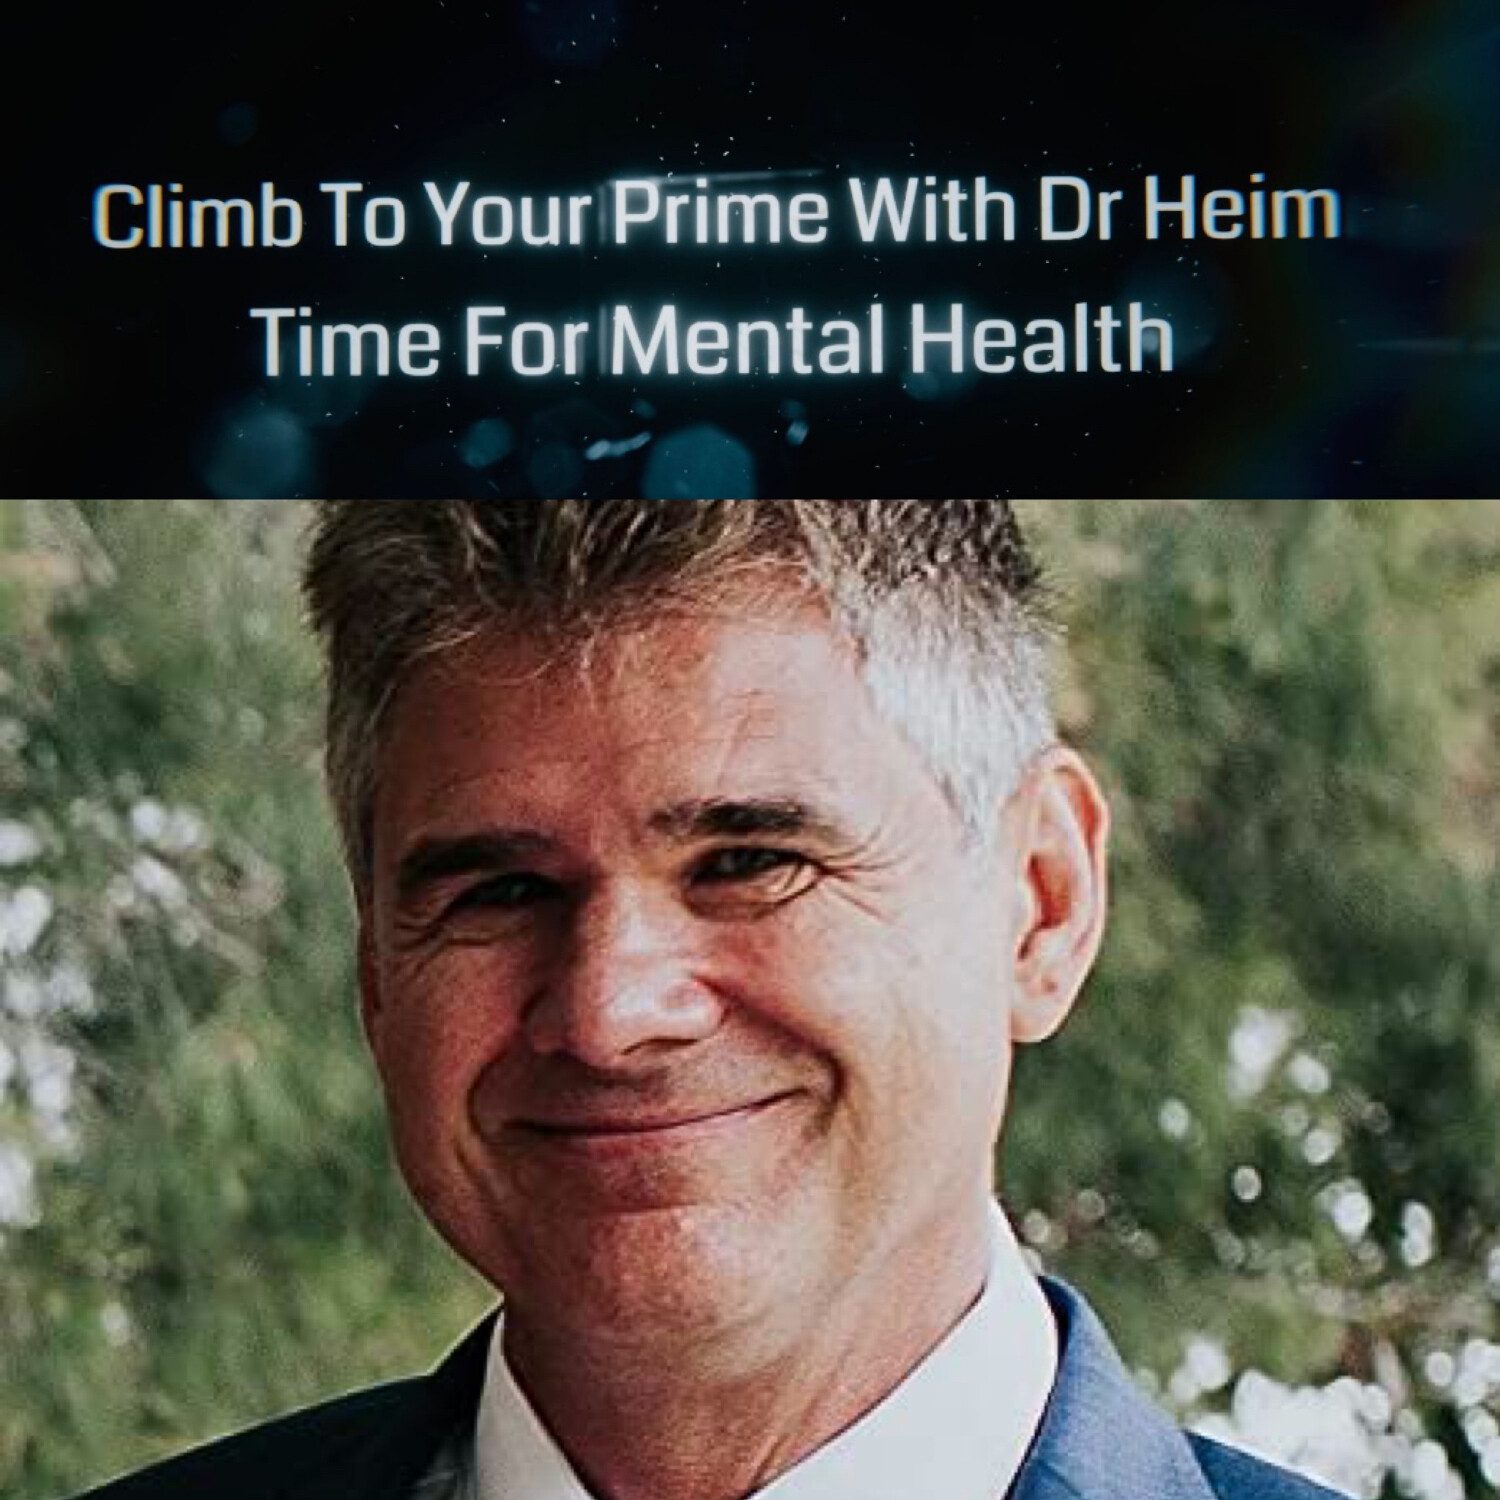 Climb To Your Prime With Dr Heim, Time For Mental Health Live Q&A S2 EP4